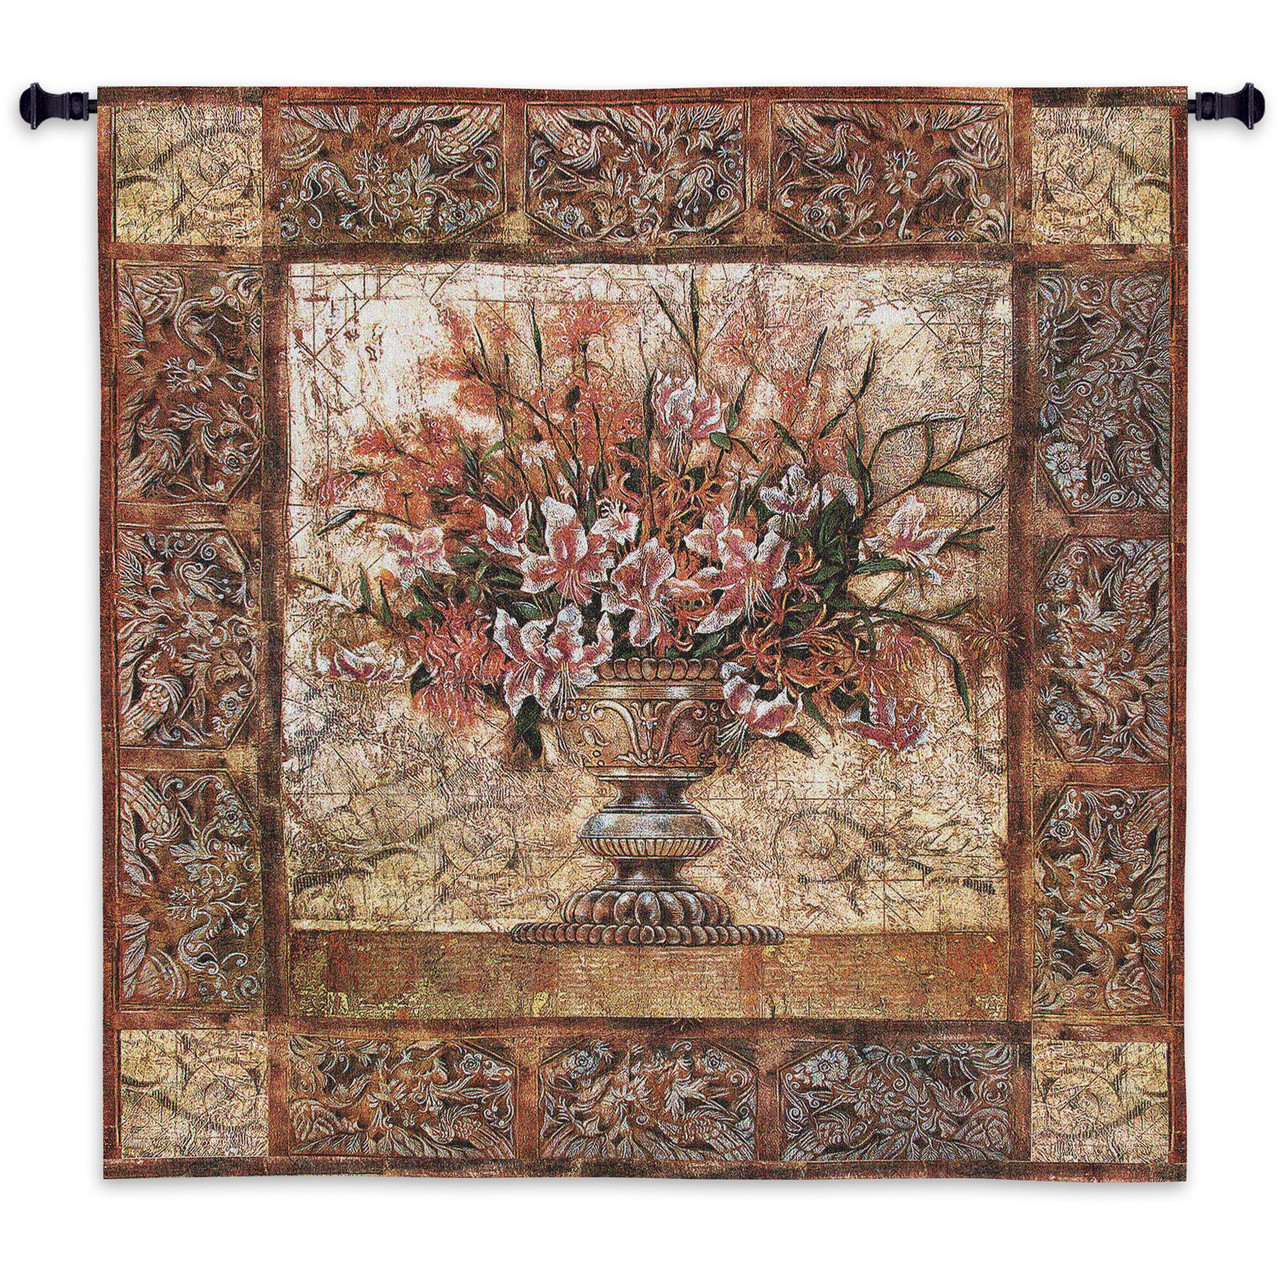 Floral Tapestry, Woven Tapestry Wall Art Hanging, Large Intricate Floral  Decorative Urn Centerpiece